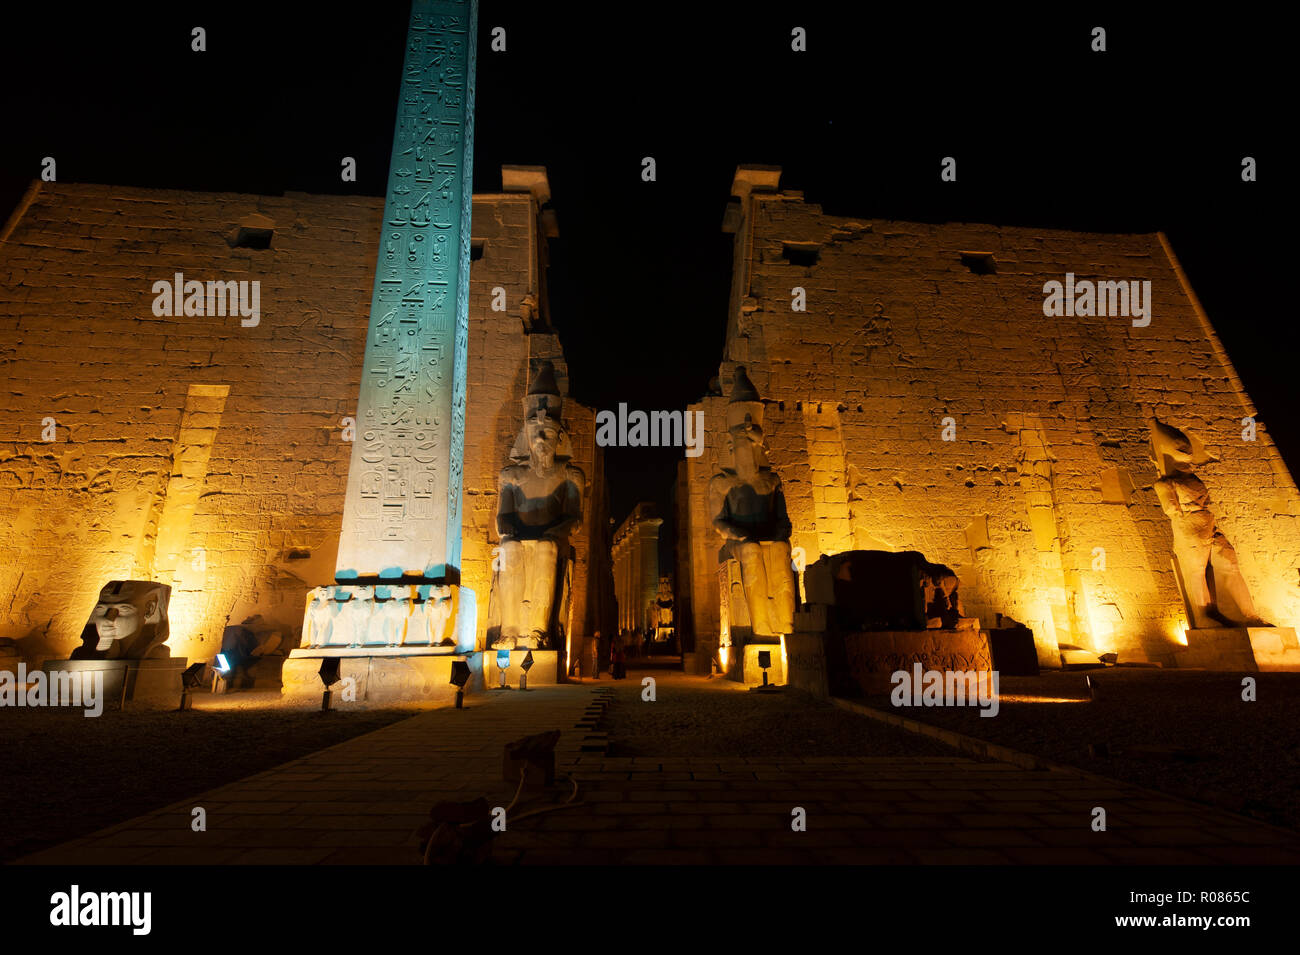 Entrance to Luxor Temple at night, a large Ancient Egyptian temple complex located on the east bank of the Nile River. Stock Photo